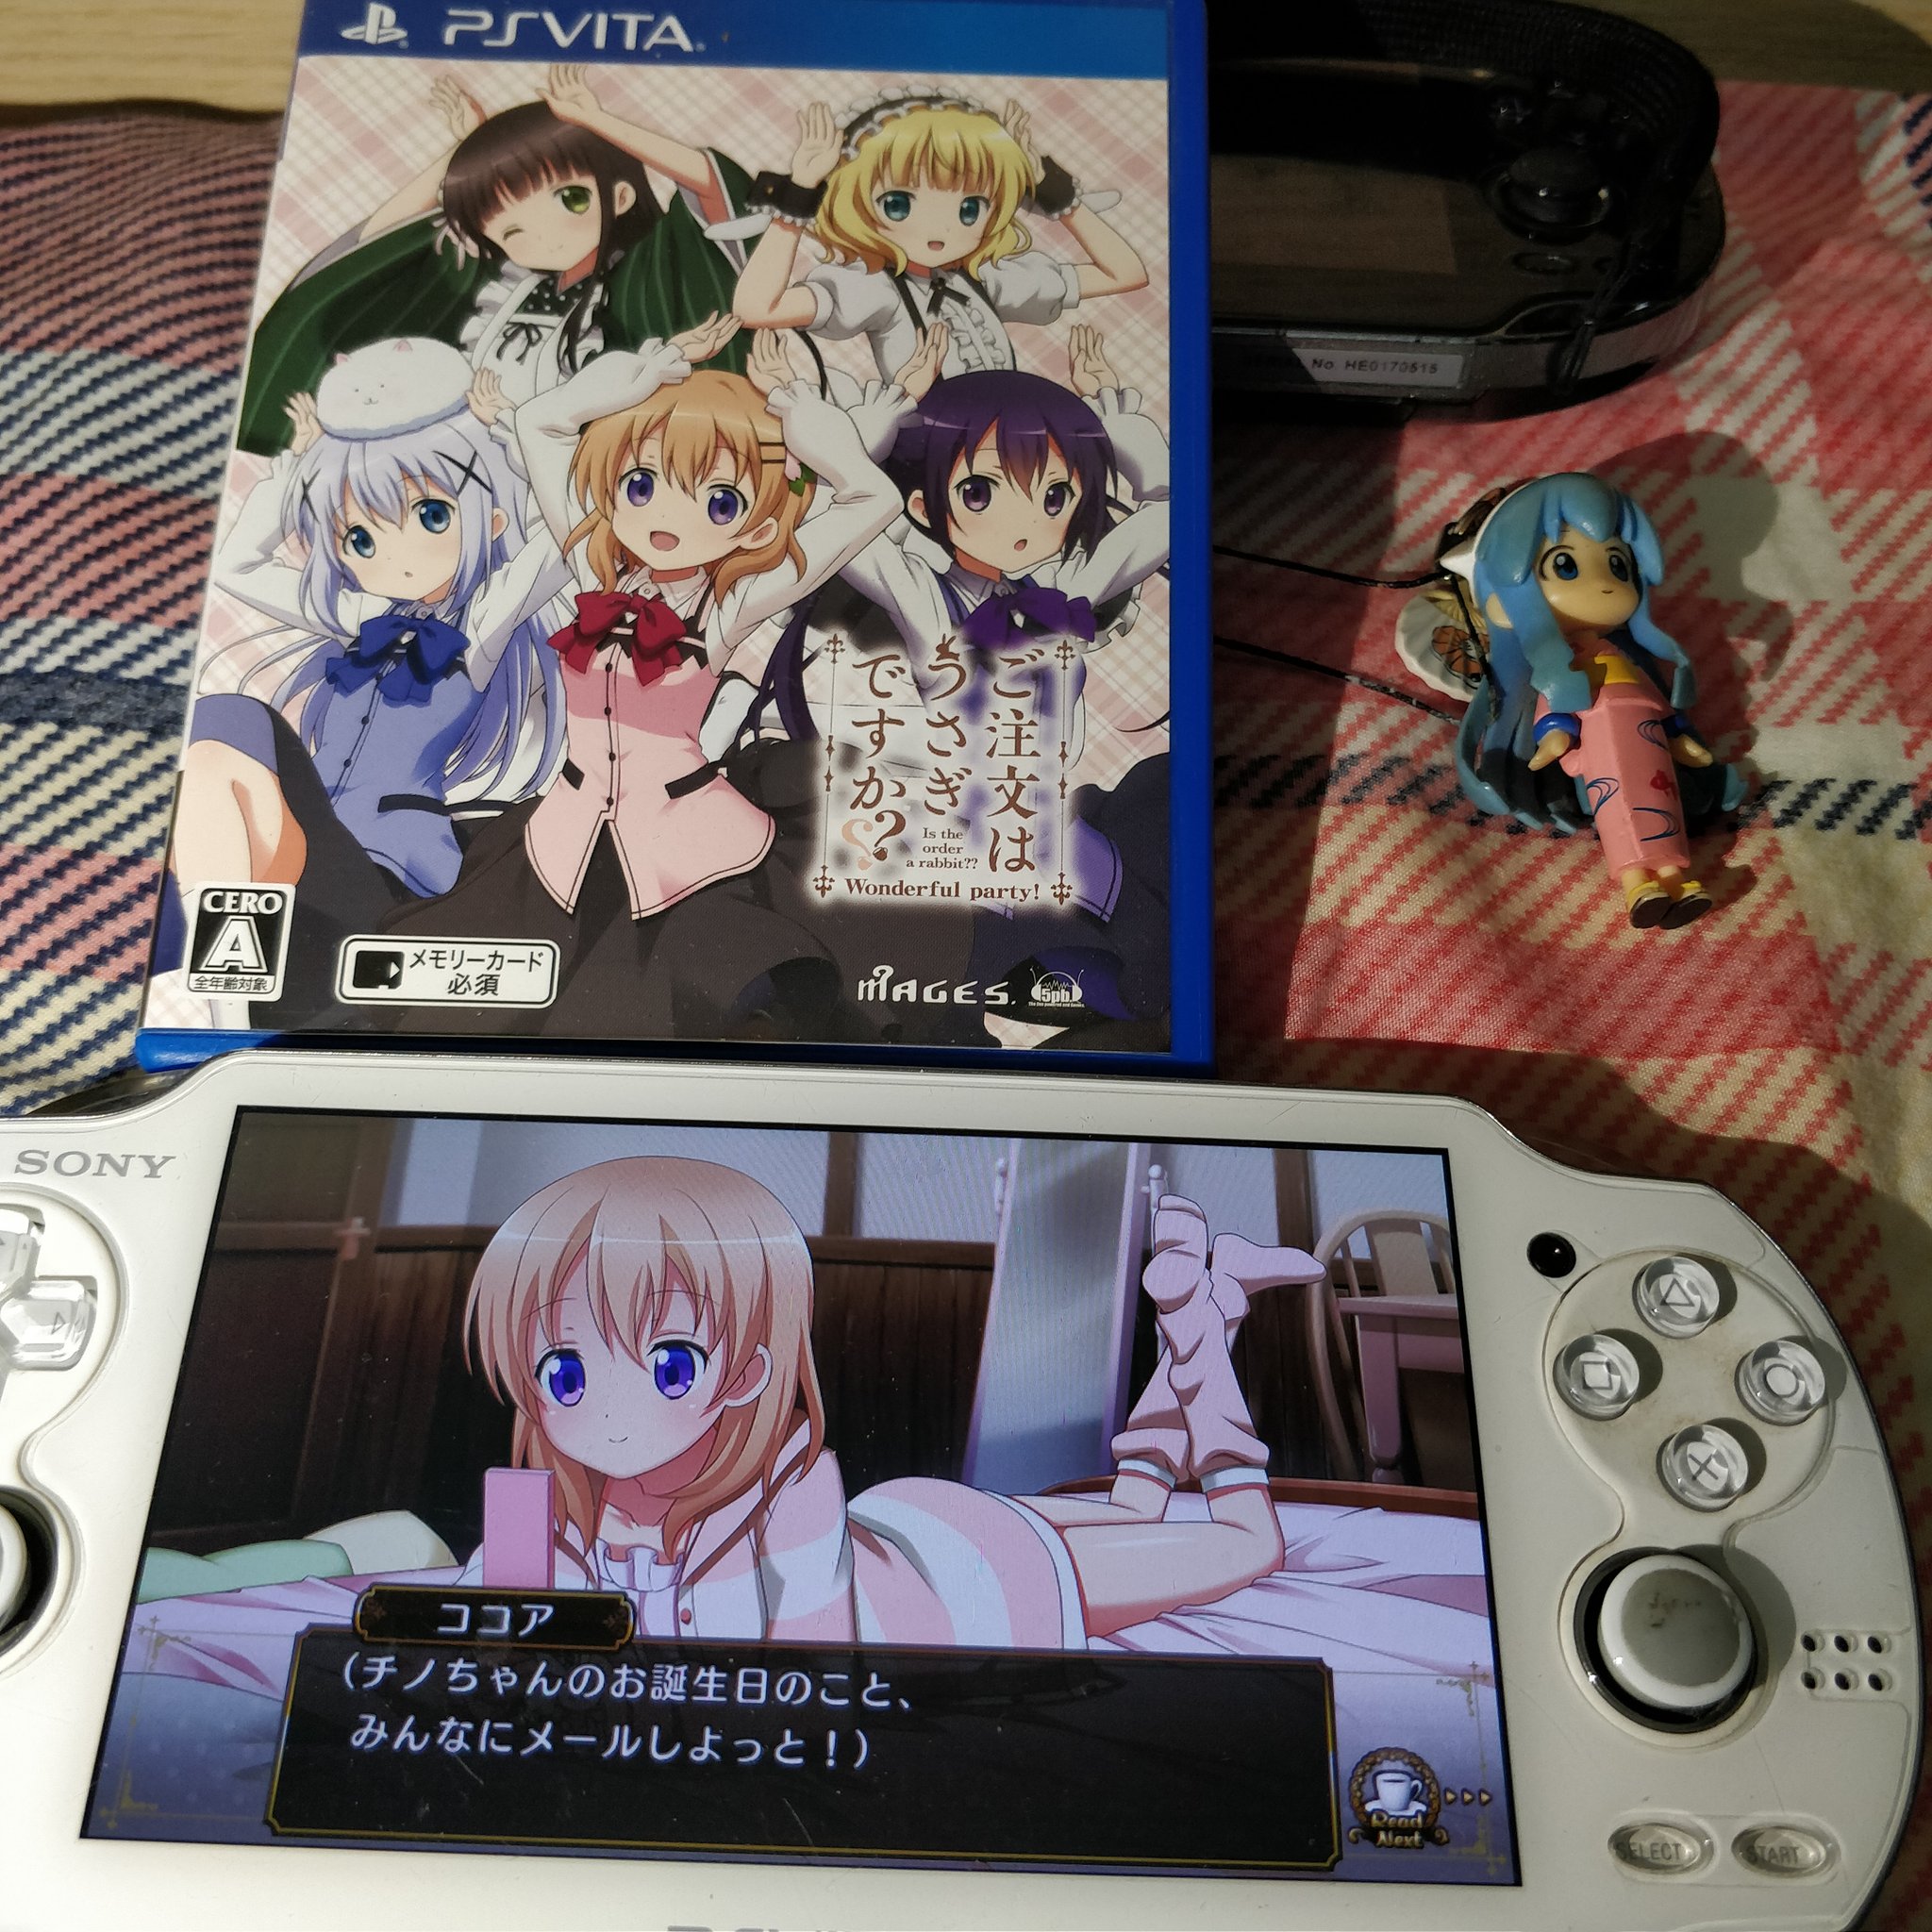 Shigeru A Relaxing Vn Game To Play On Sick Days Easy To Read Japanese Gal Game Visual Novel Also All The Chara Is Moe And Cute Gochiusa ごちうさbloom ご注文はうさぎですか